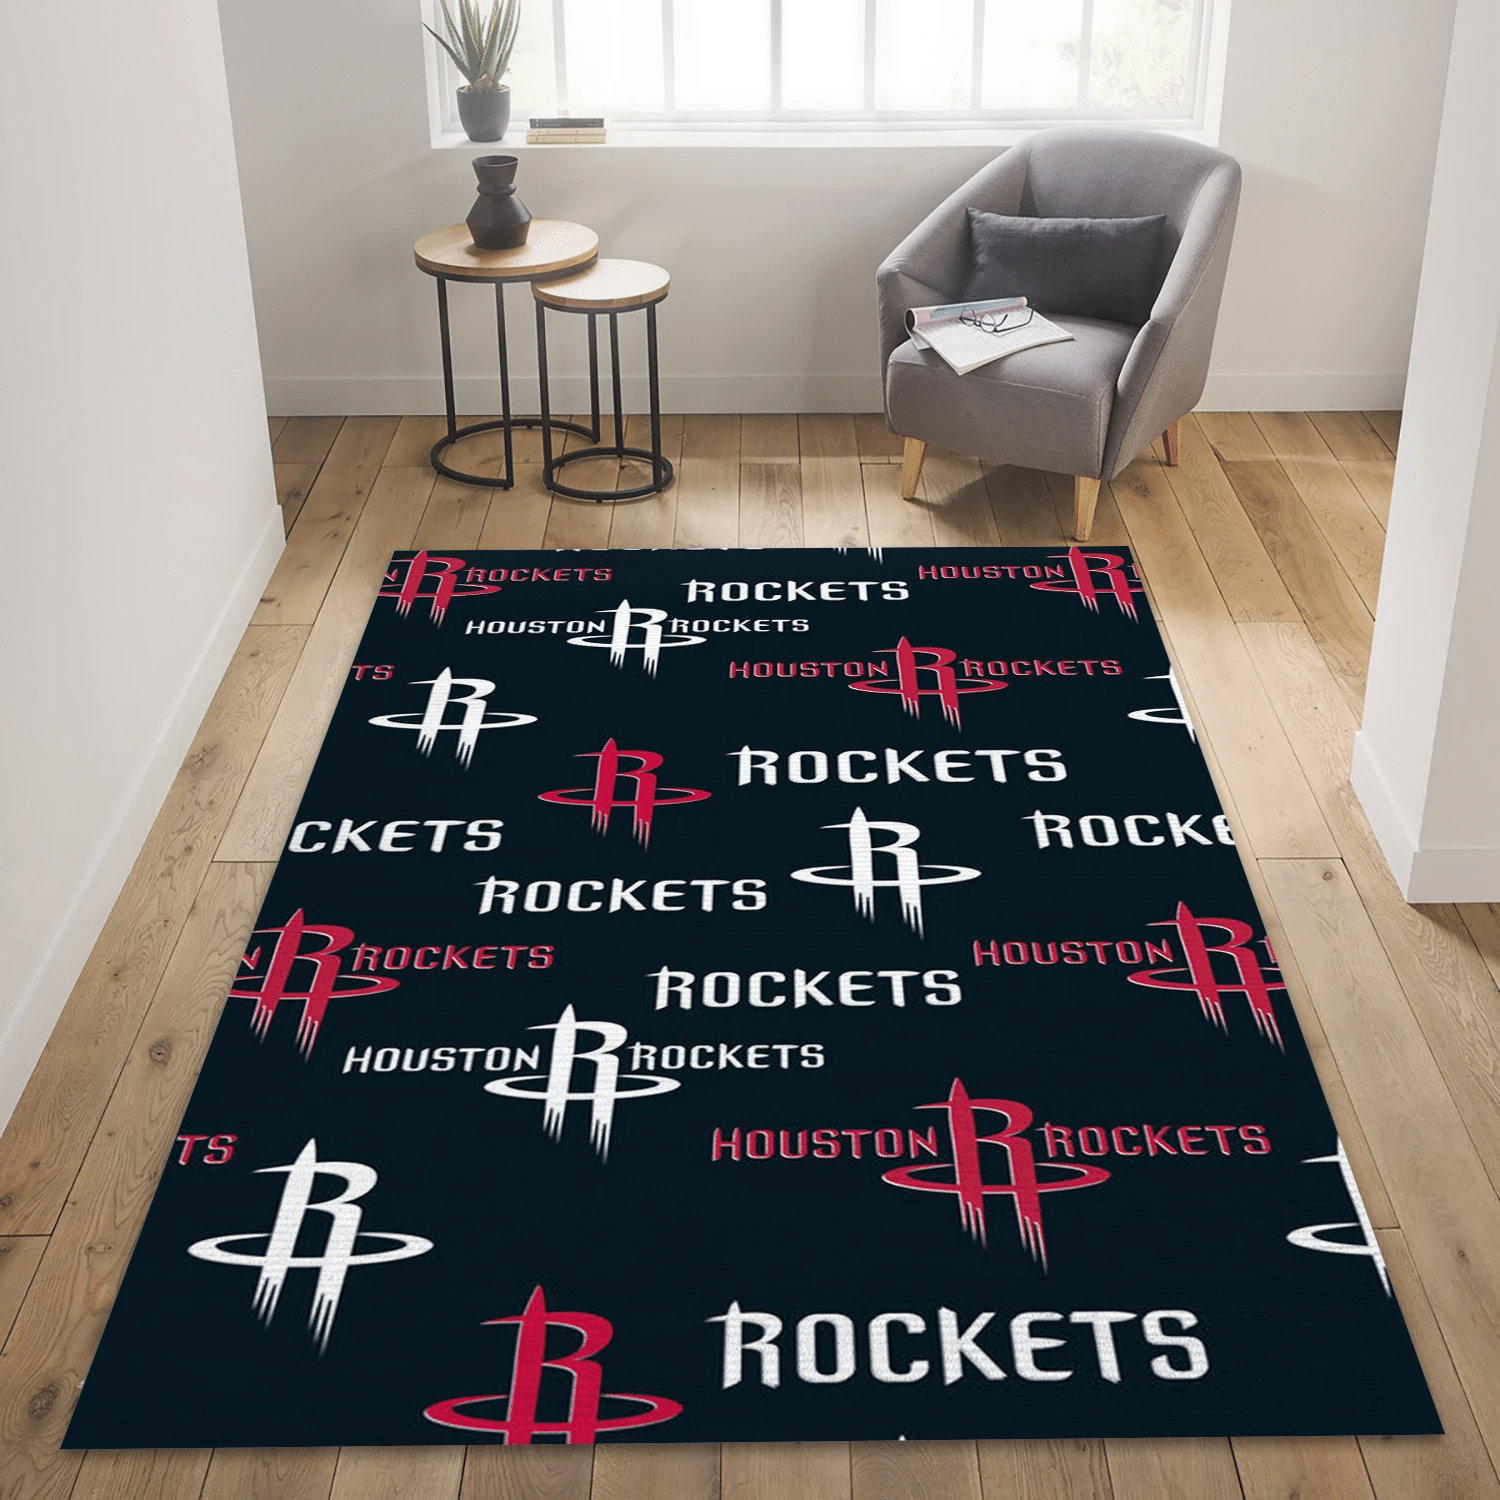 Houston Rockets Patterns 1 Reangle Area Rug, Living Room Rug - Home Decor - Indoor Outdoor Rugs 1